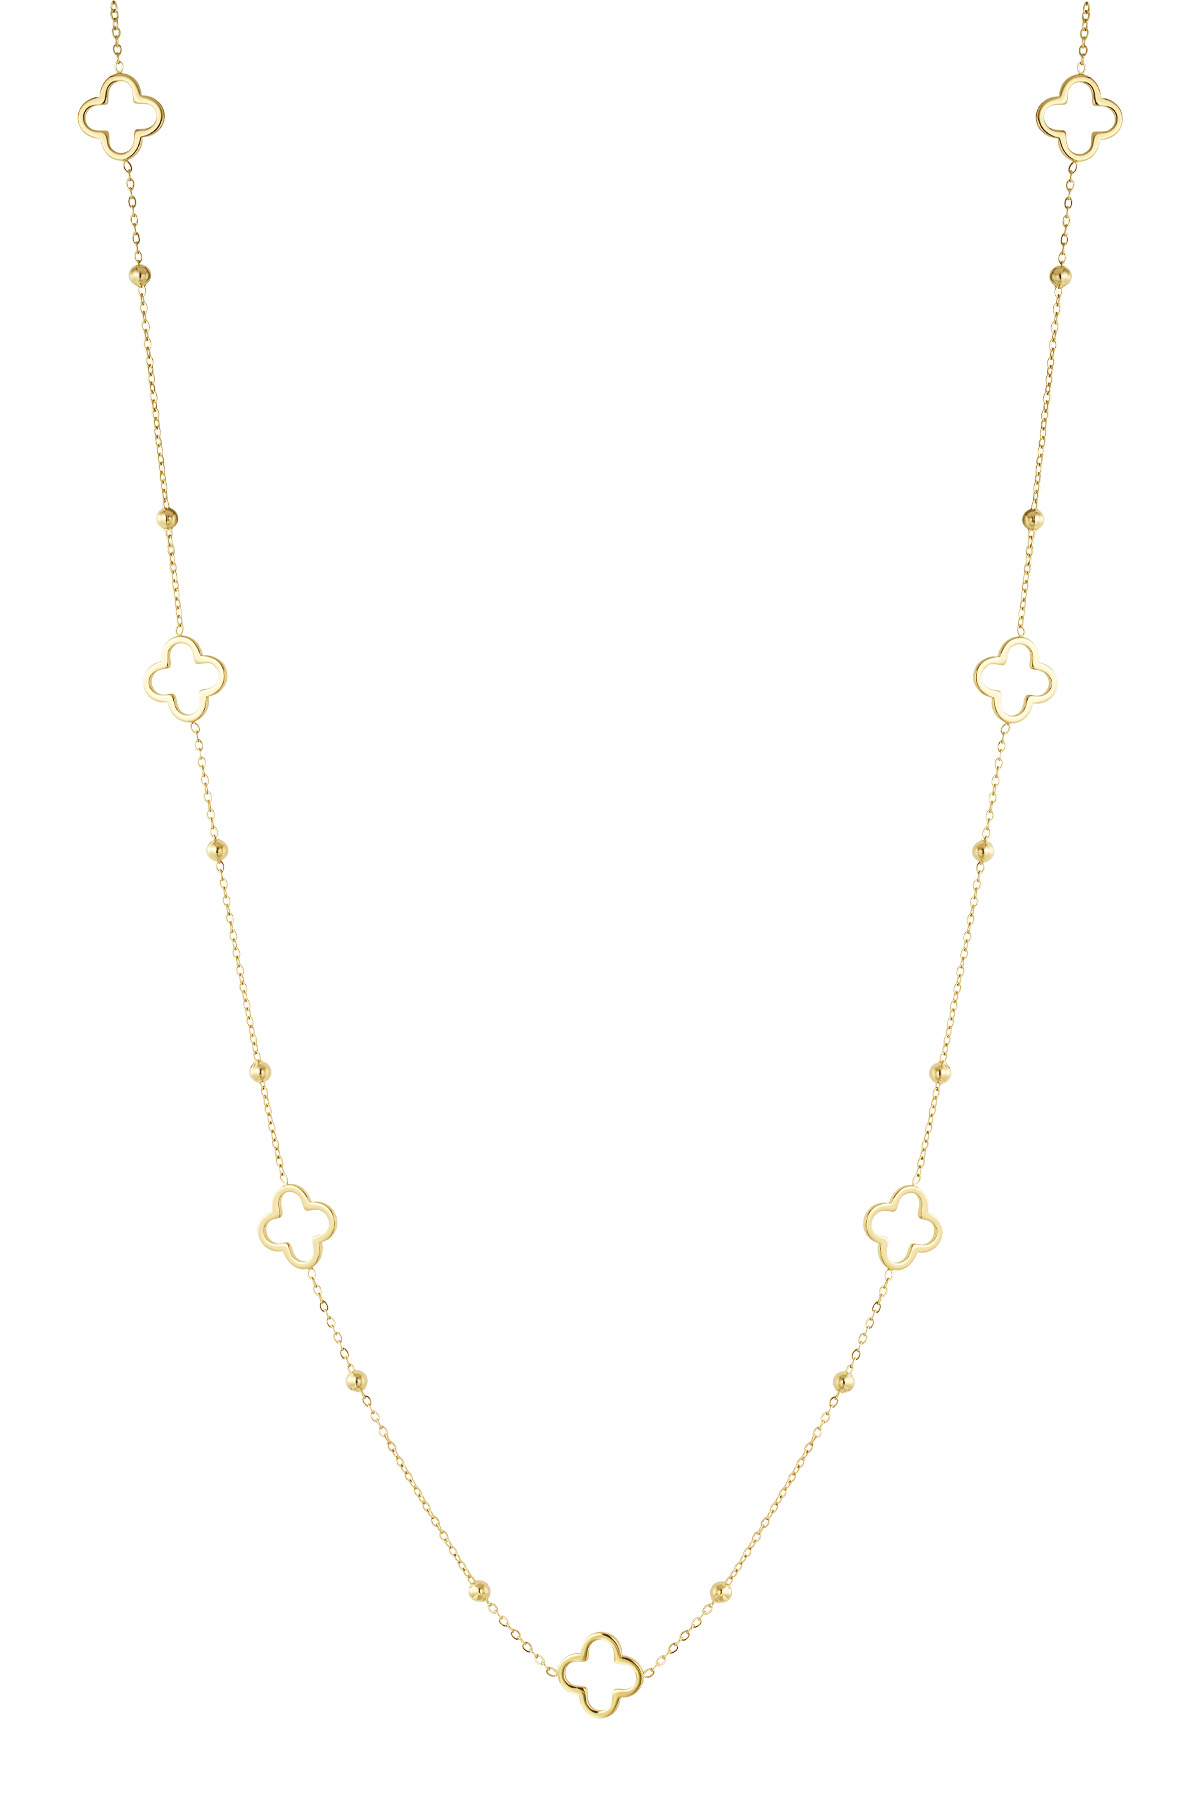 Long necklace with clover charms - gold  h5 